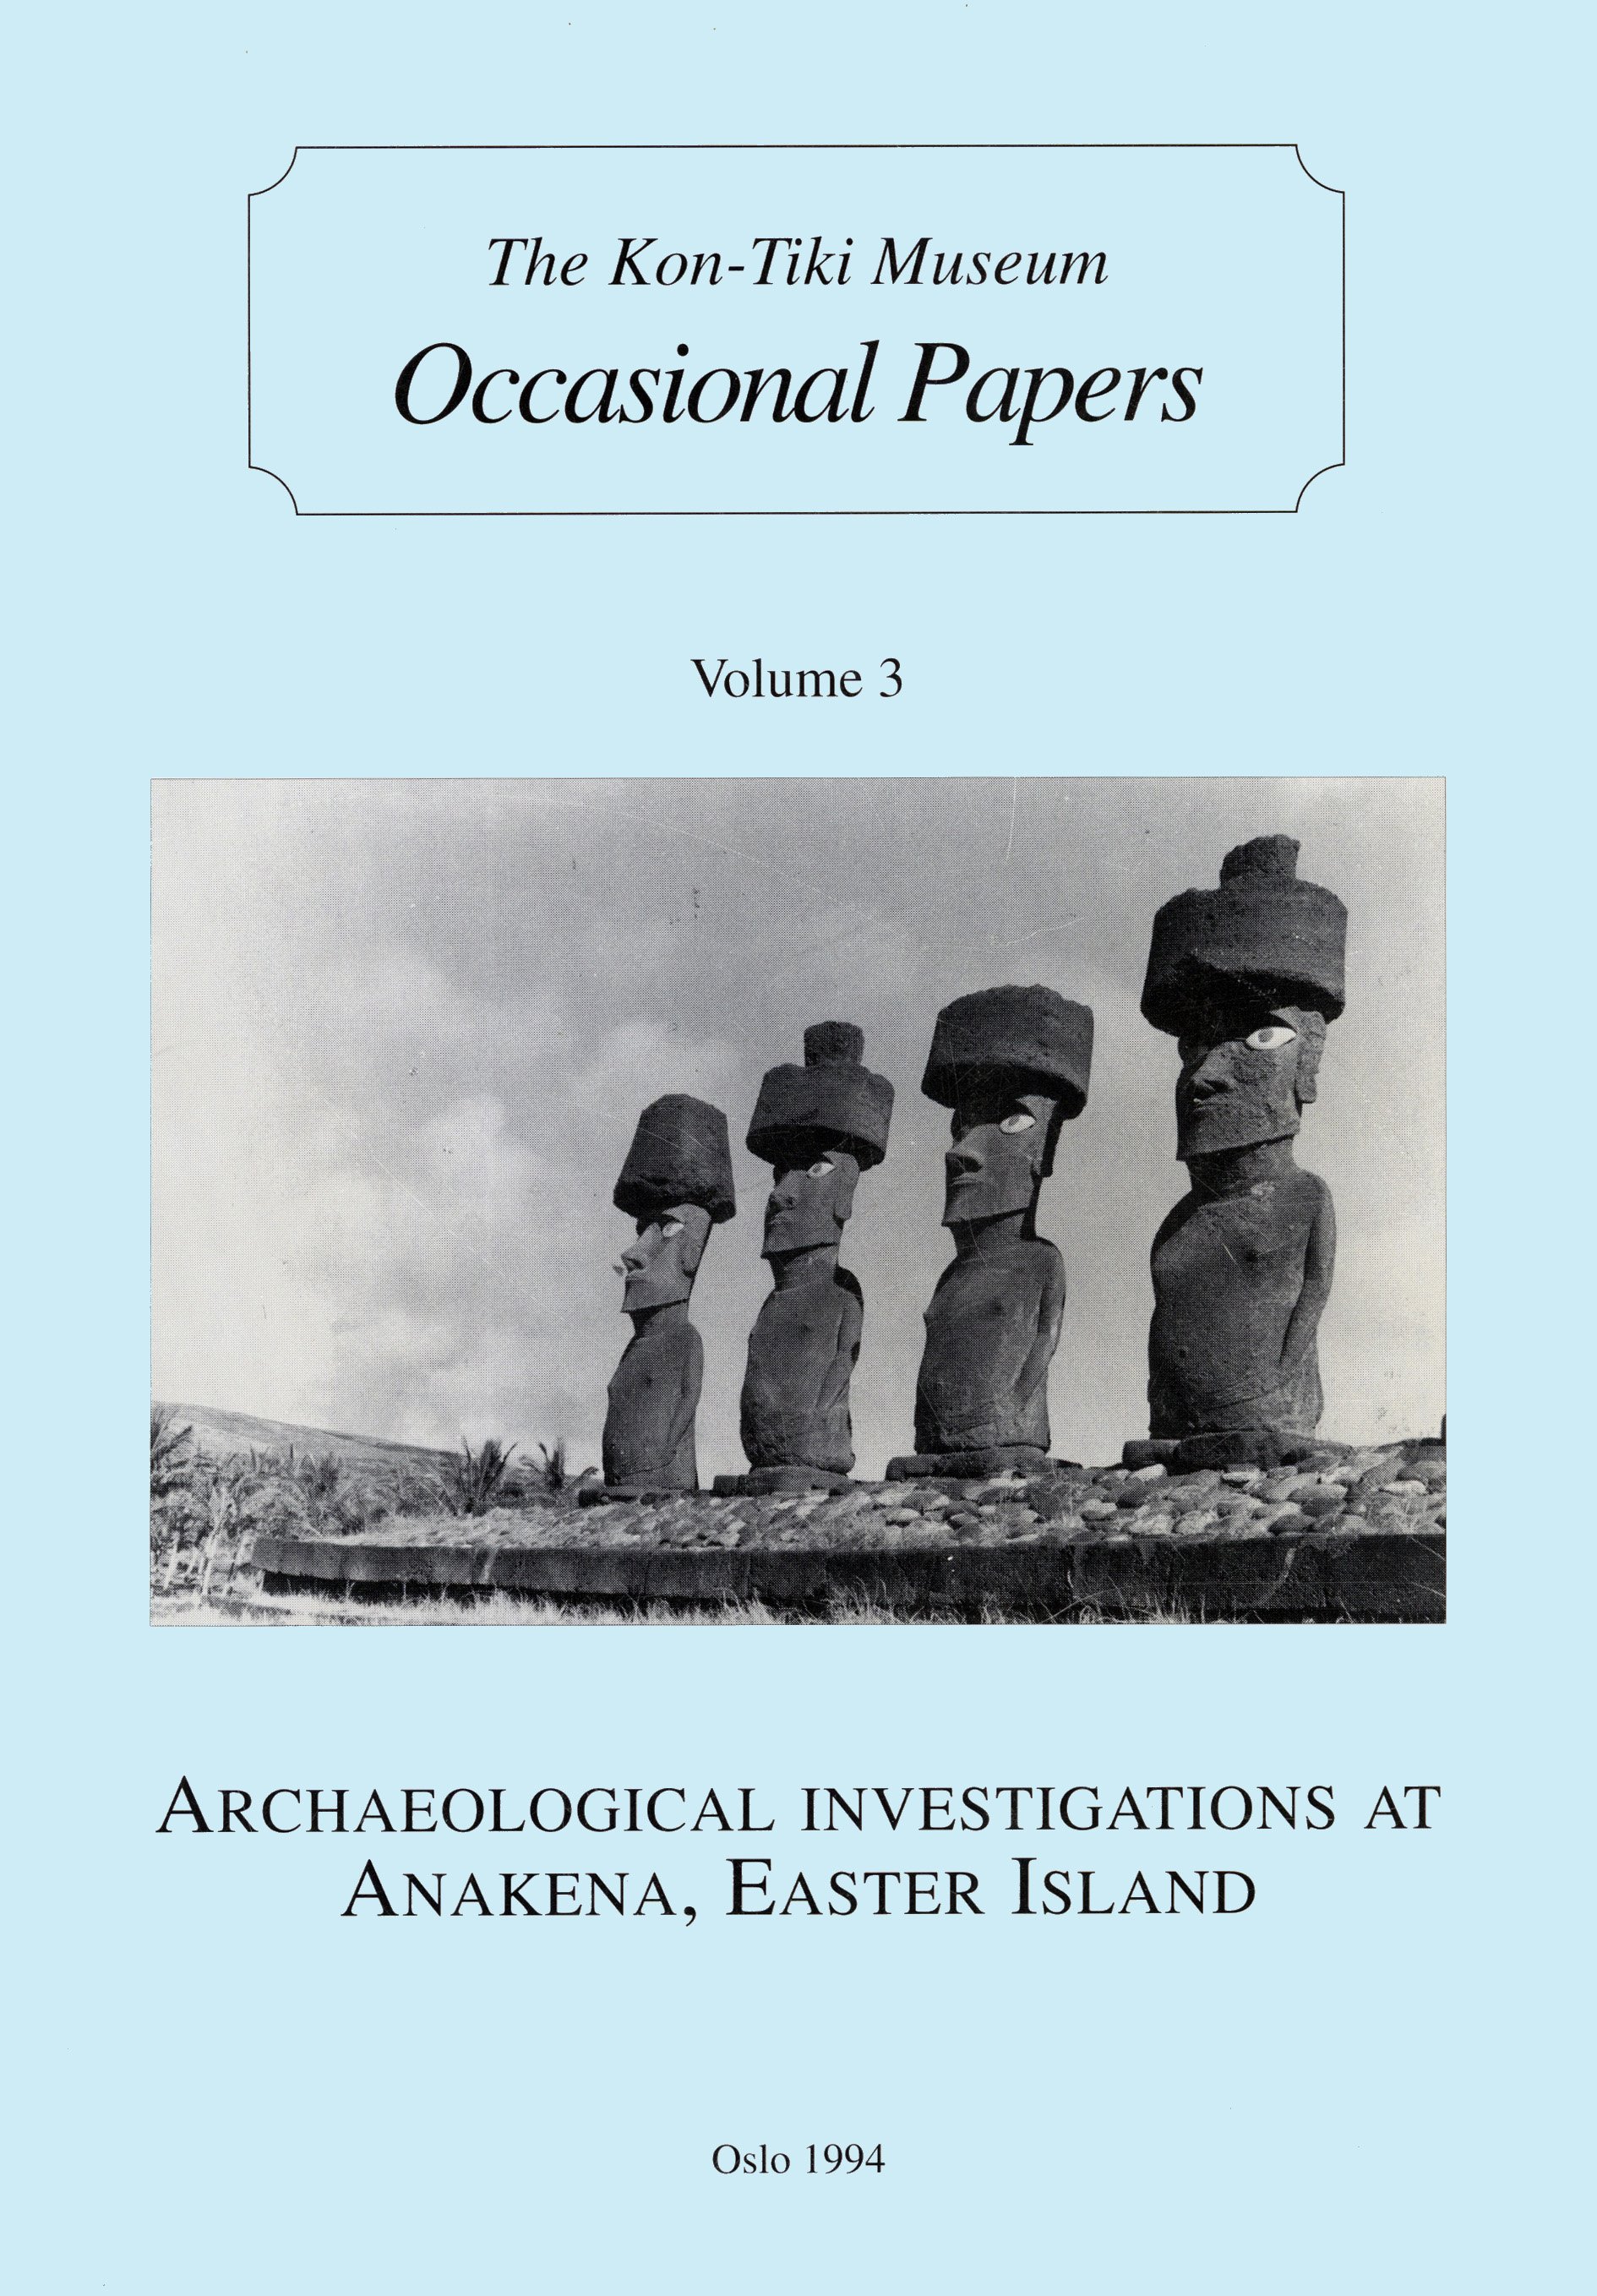 Archaeological Investigations at Anakena, Easter Island